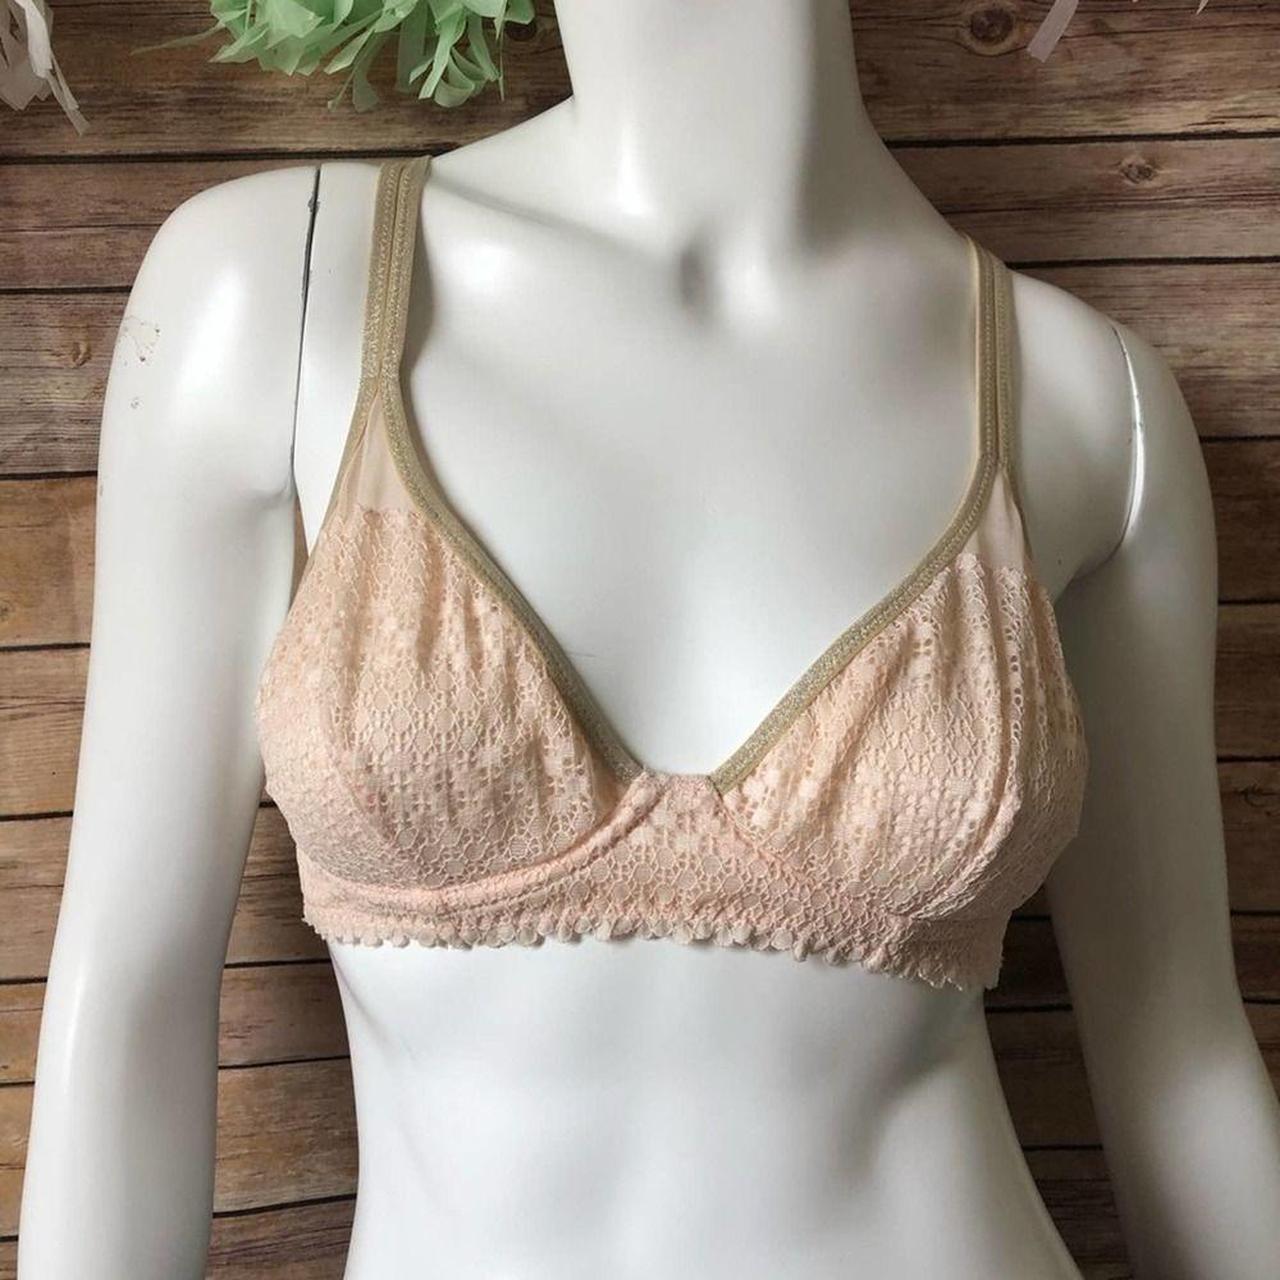 Aerie cross back all lace bralette size 34C , Size